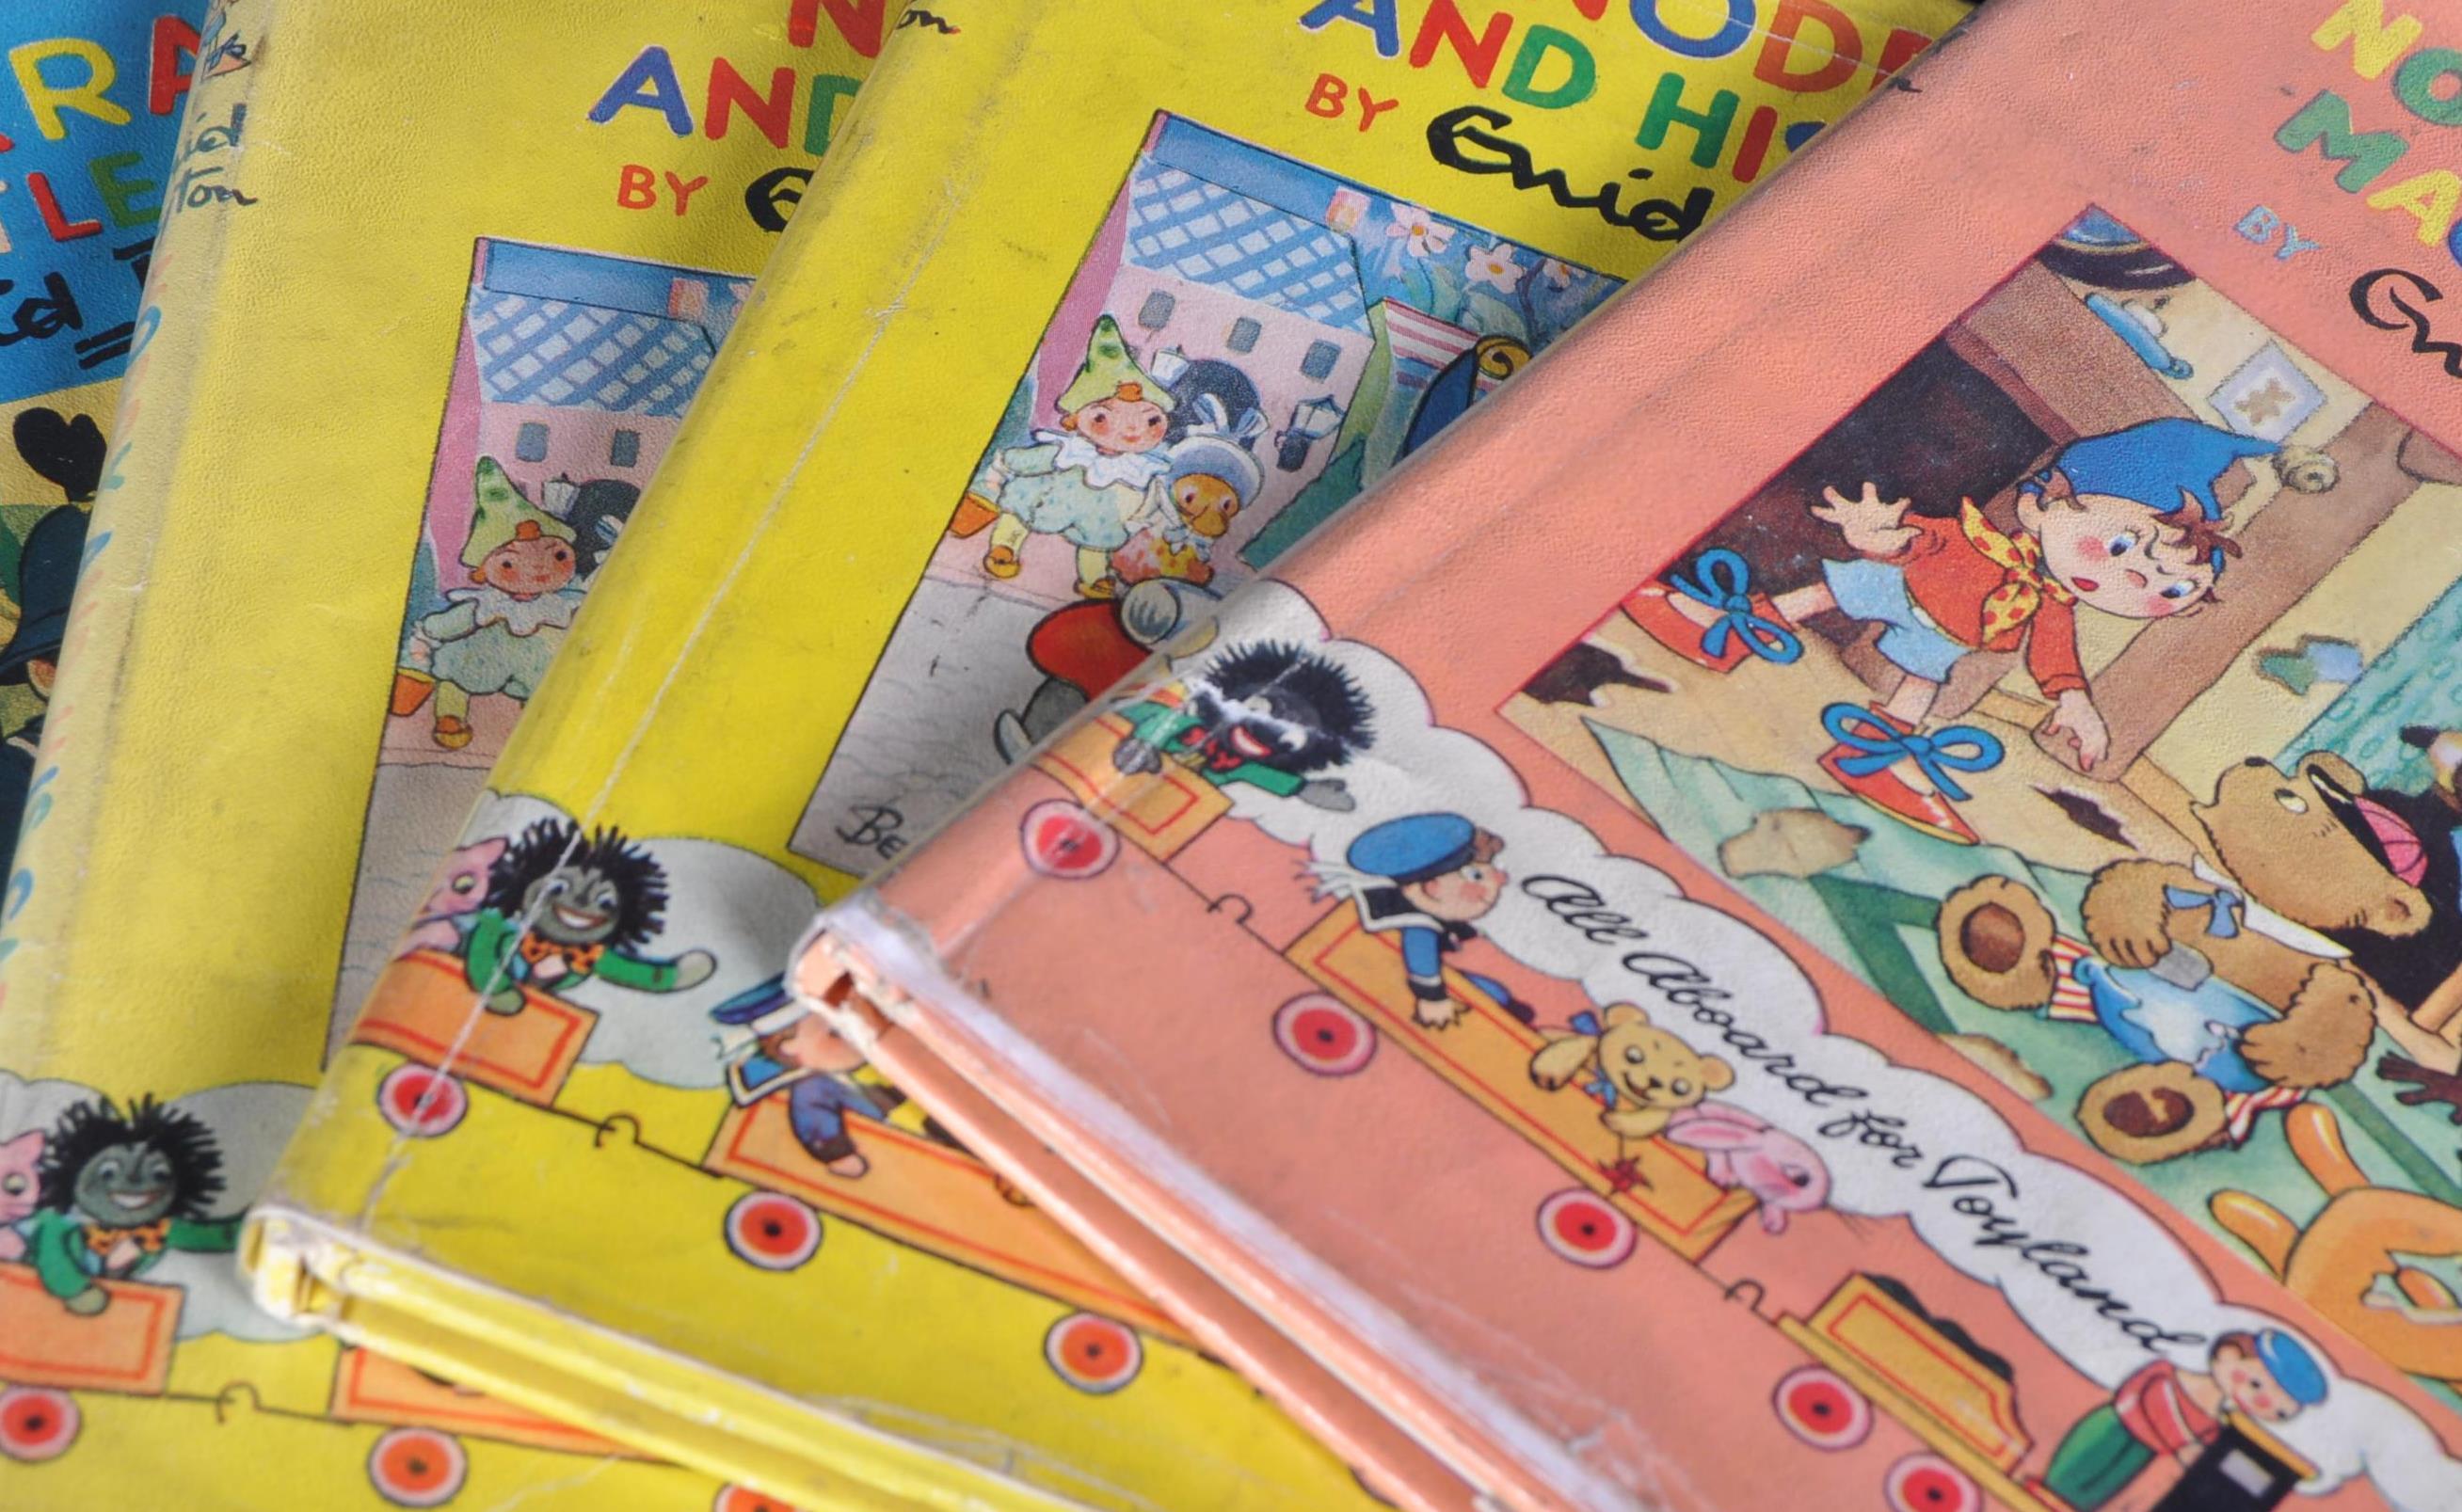 COLLECTION OF VINTAGE ENID BLYTON NODDY BOOKS - Image 4 of 8